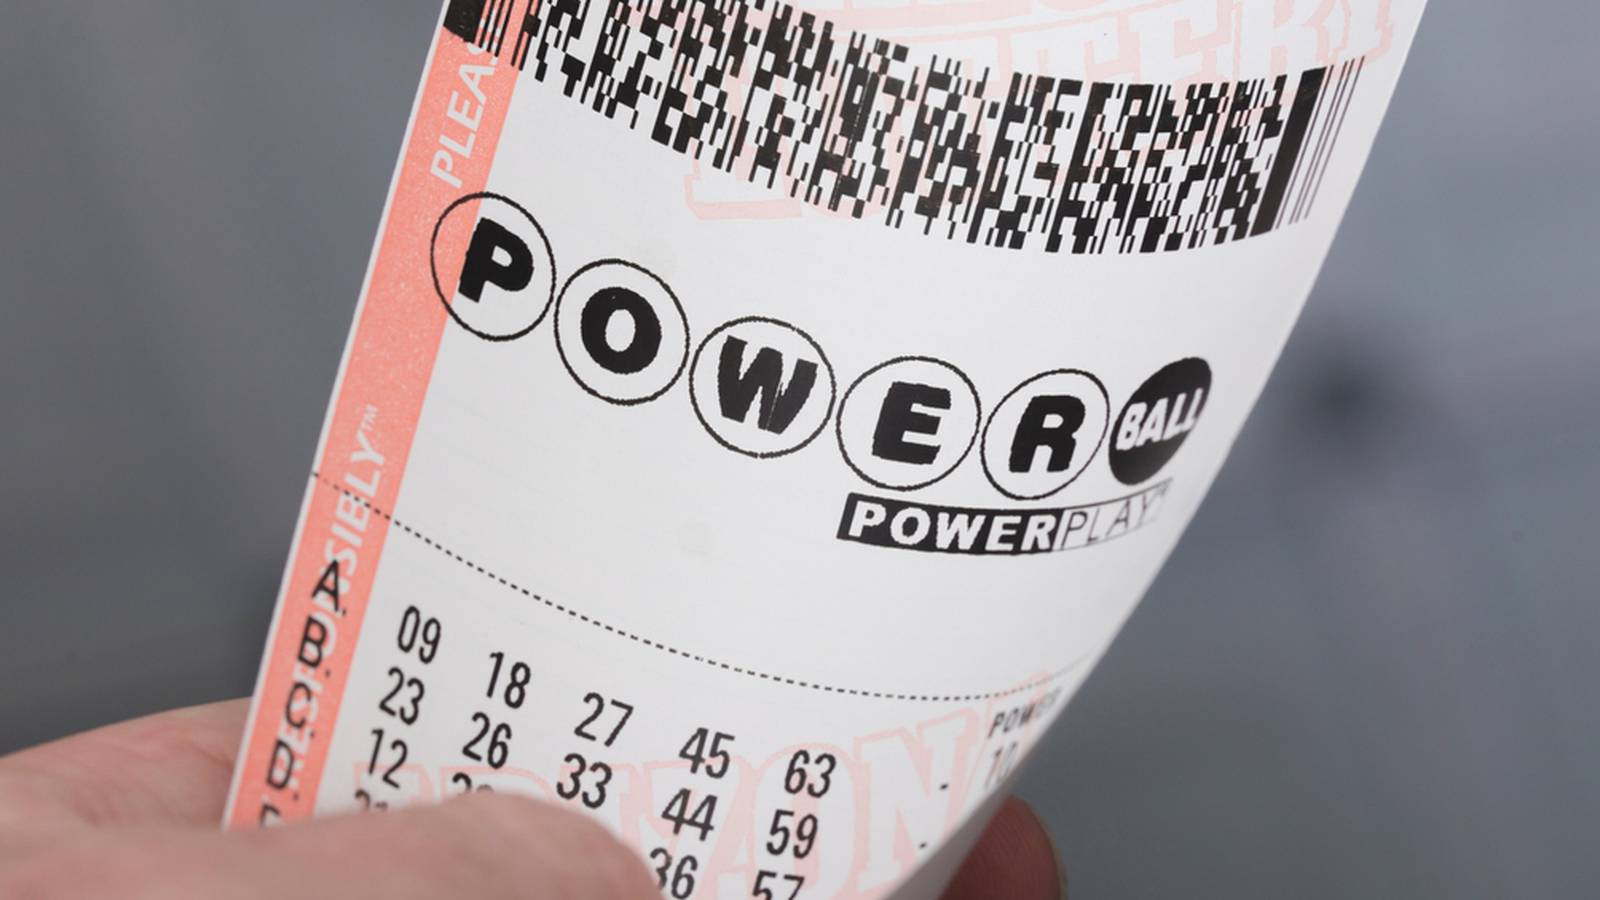 Powerball Jackpot rises to 638 million for Christmas drawing 97.1